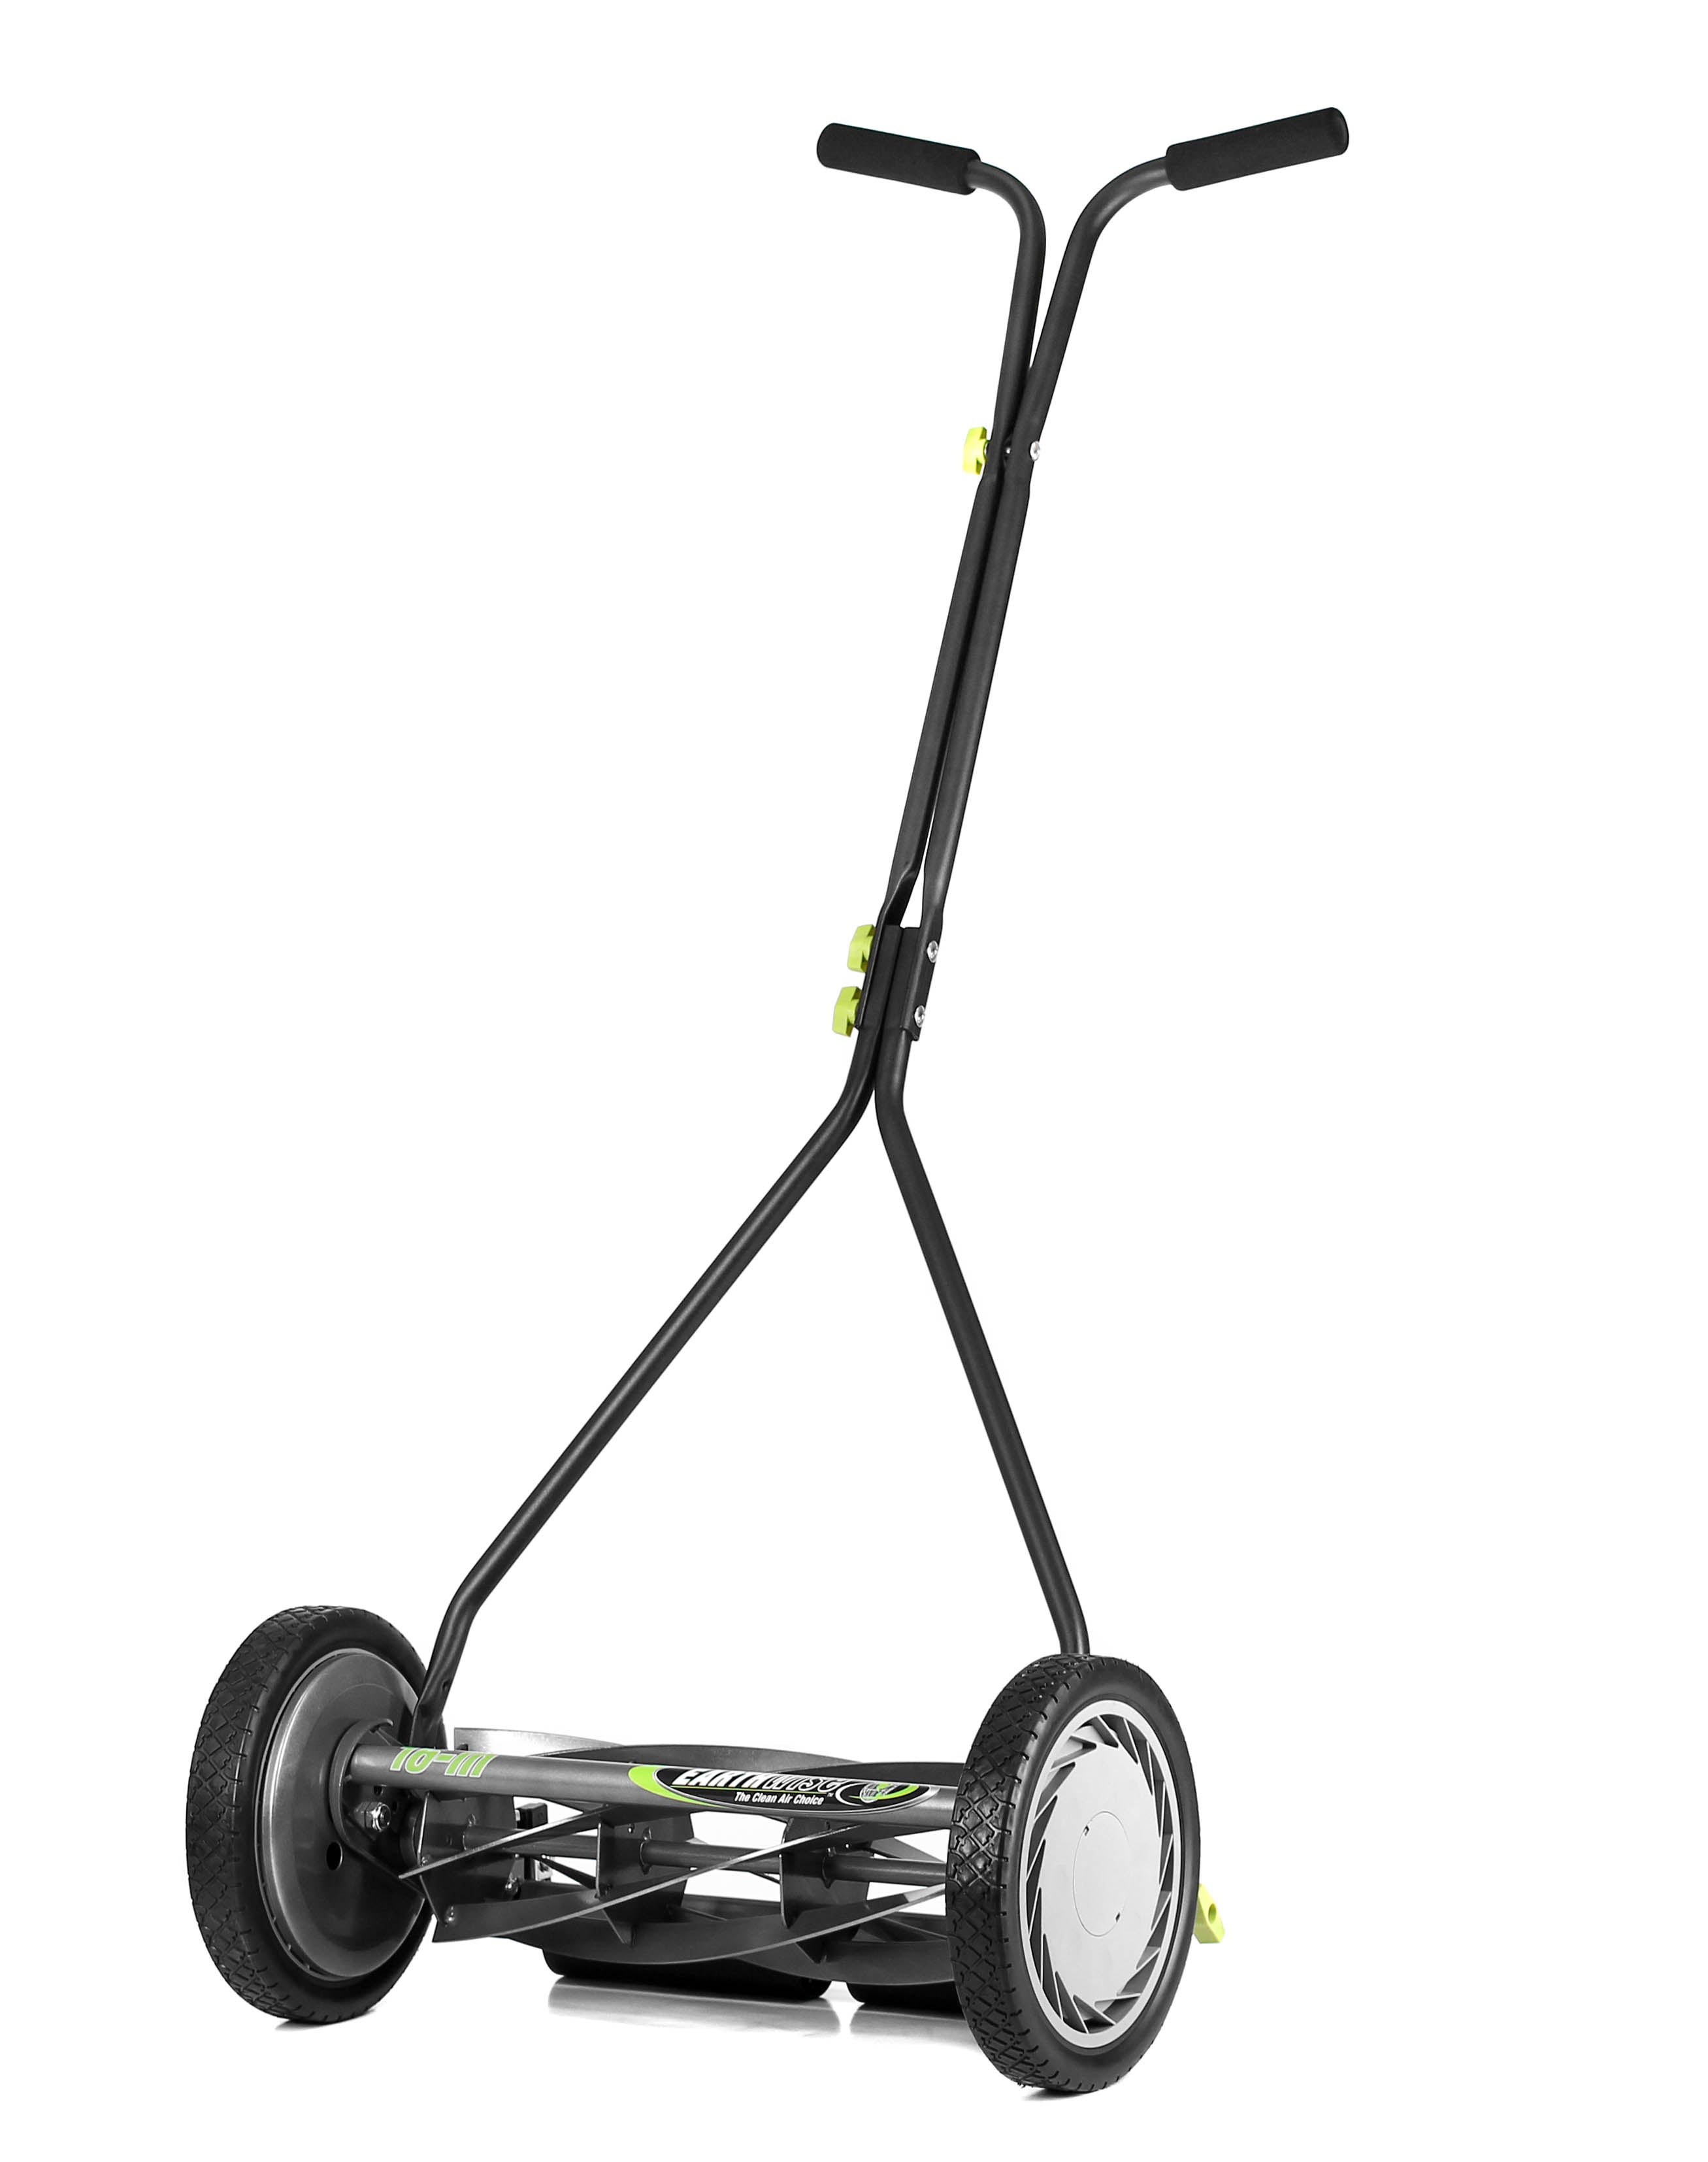 Earthwise Power Tools by ALM 16 Manual 7 Blade Reel Mower for